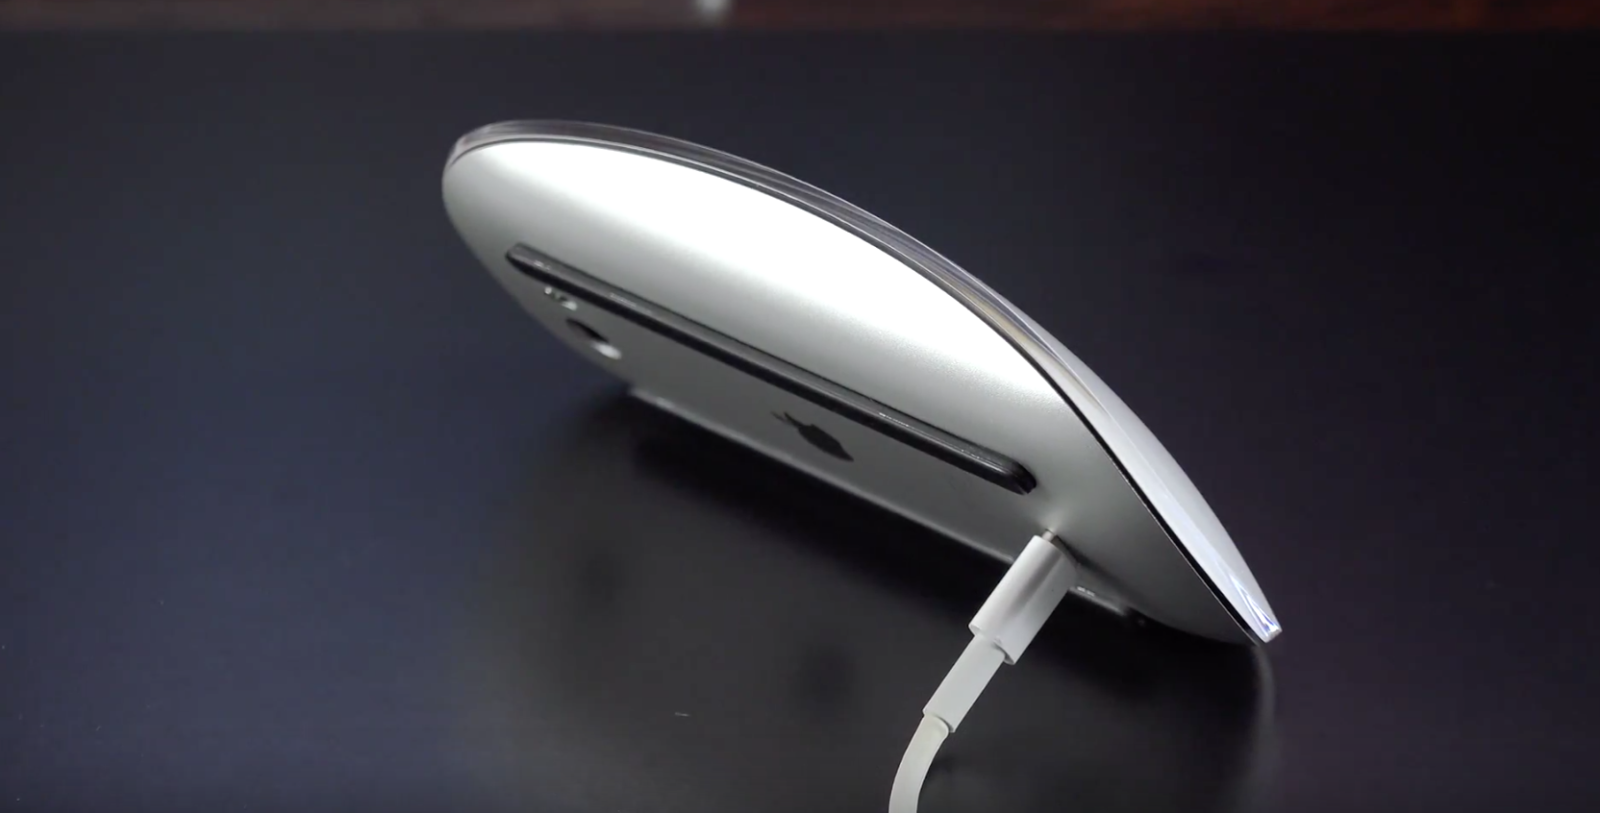 Video: Apple's Lightning-equipped Magic Mouse 2 gets unboxed and